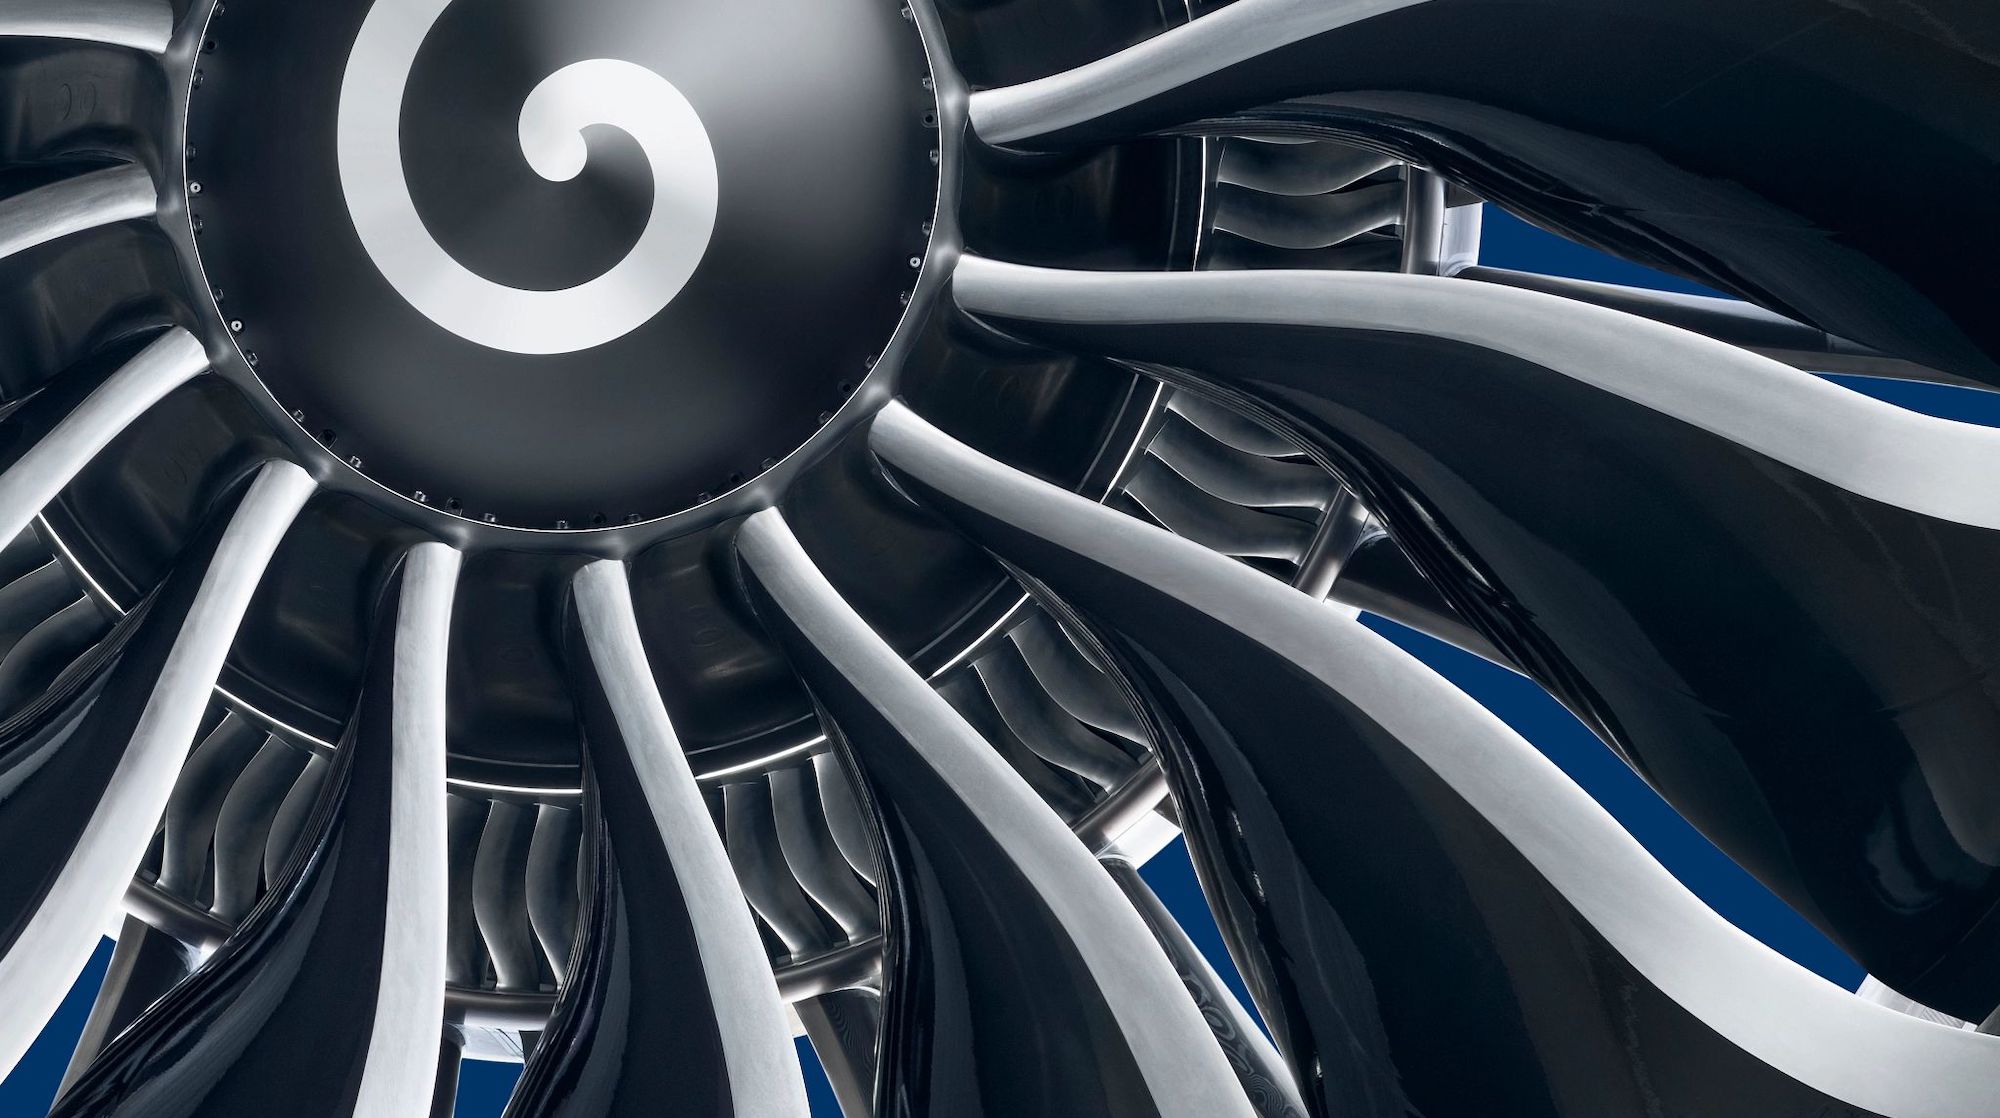 A close-up view of some of the fan blades on a GE9X engine.